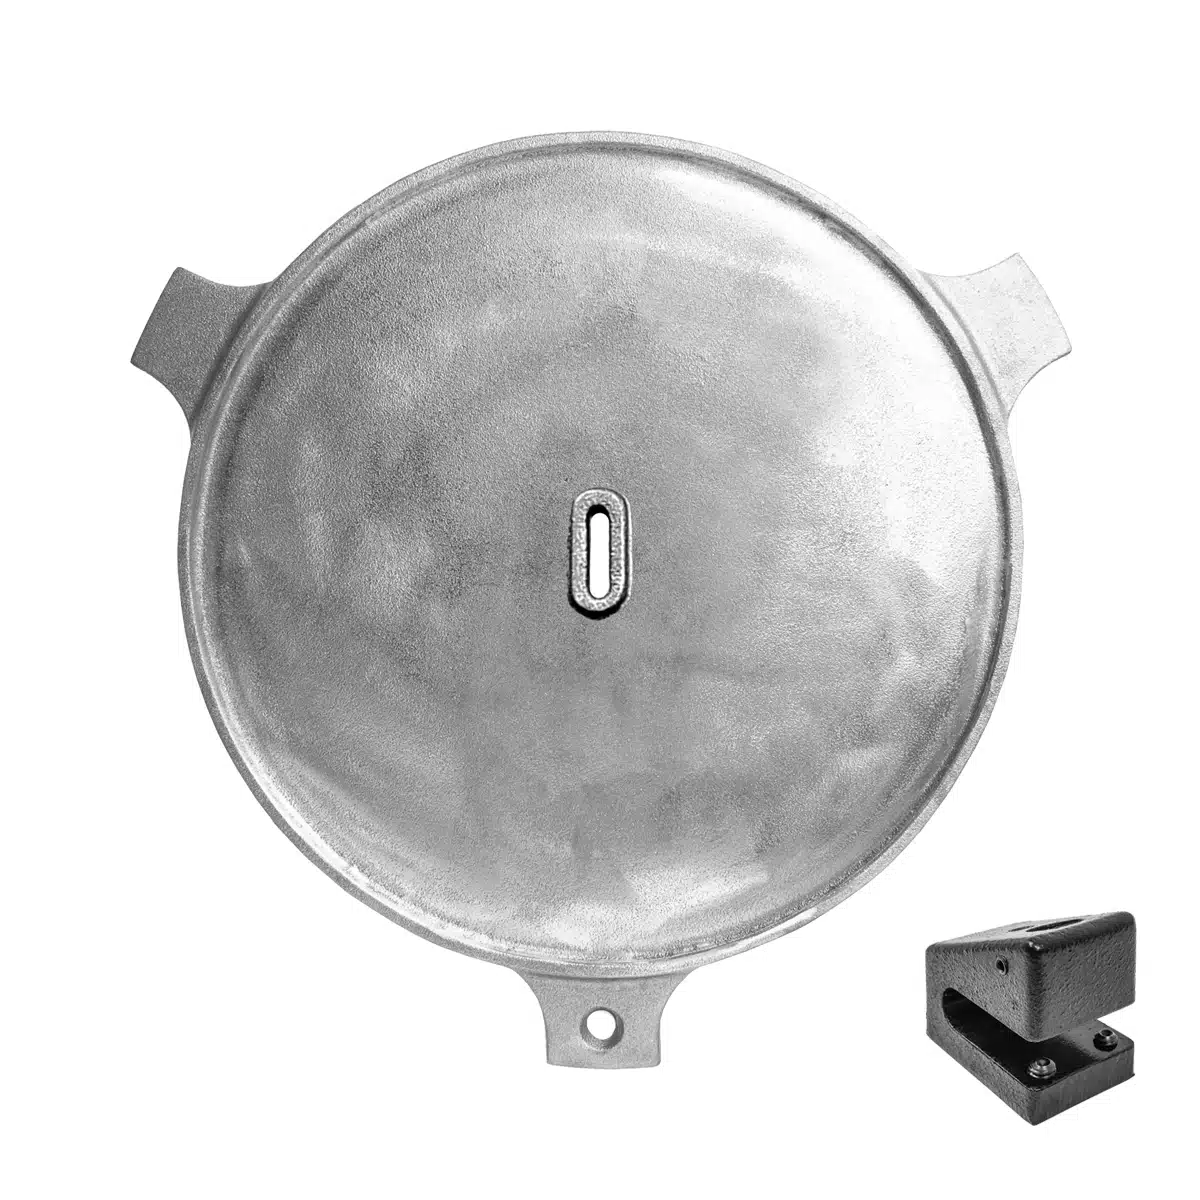 Goldens' Cast Iron Fire Pit Cooking System Large 20.5″ Searing Plate and Base posted by ProdOrigin USA in Kitchen